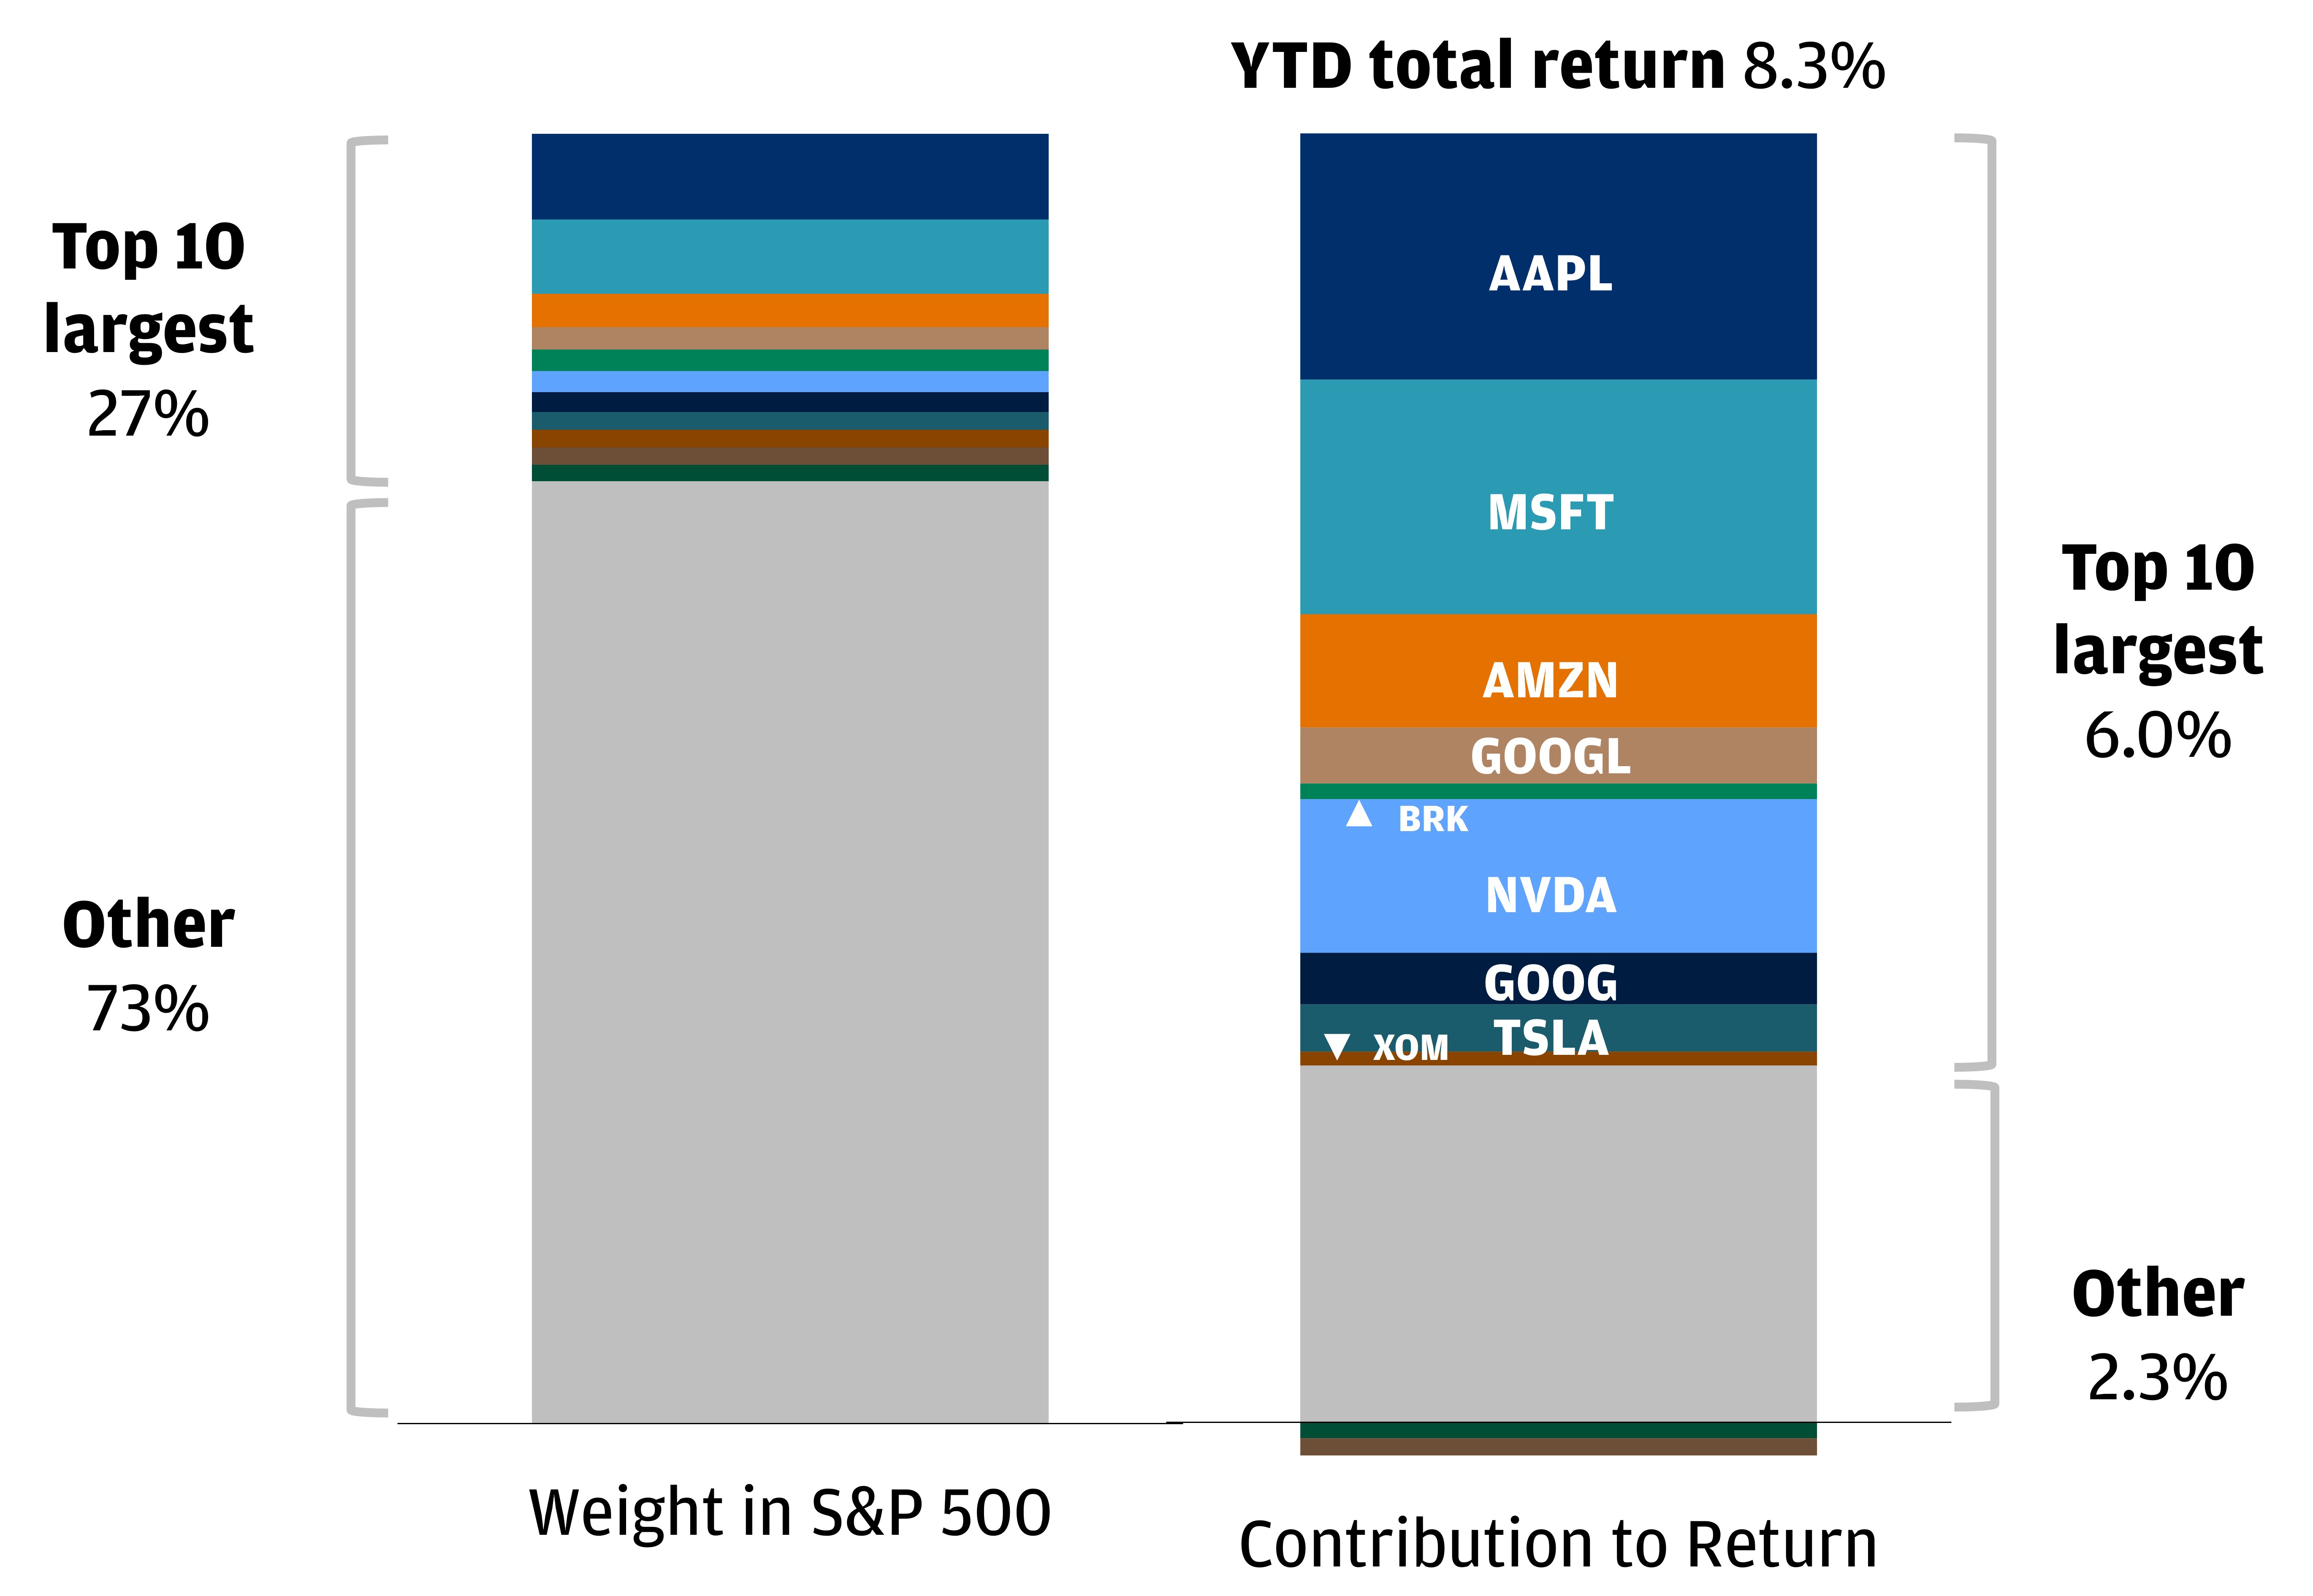 This chart shows the top 10 largest weights in the S&P 500 (namely AAPL, MSFT, AMZN, GOOGL, BRK, NVDA, GOOG, TESLA, XOM, UNH and JNJ), which make up 18% of the total index.